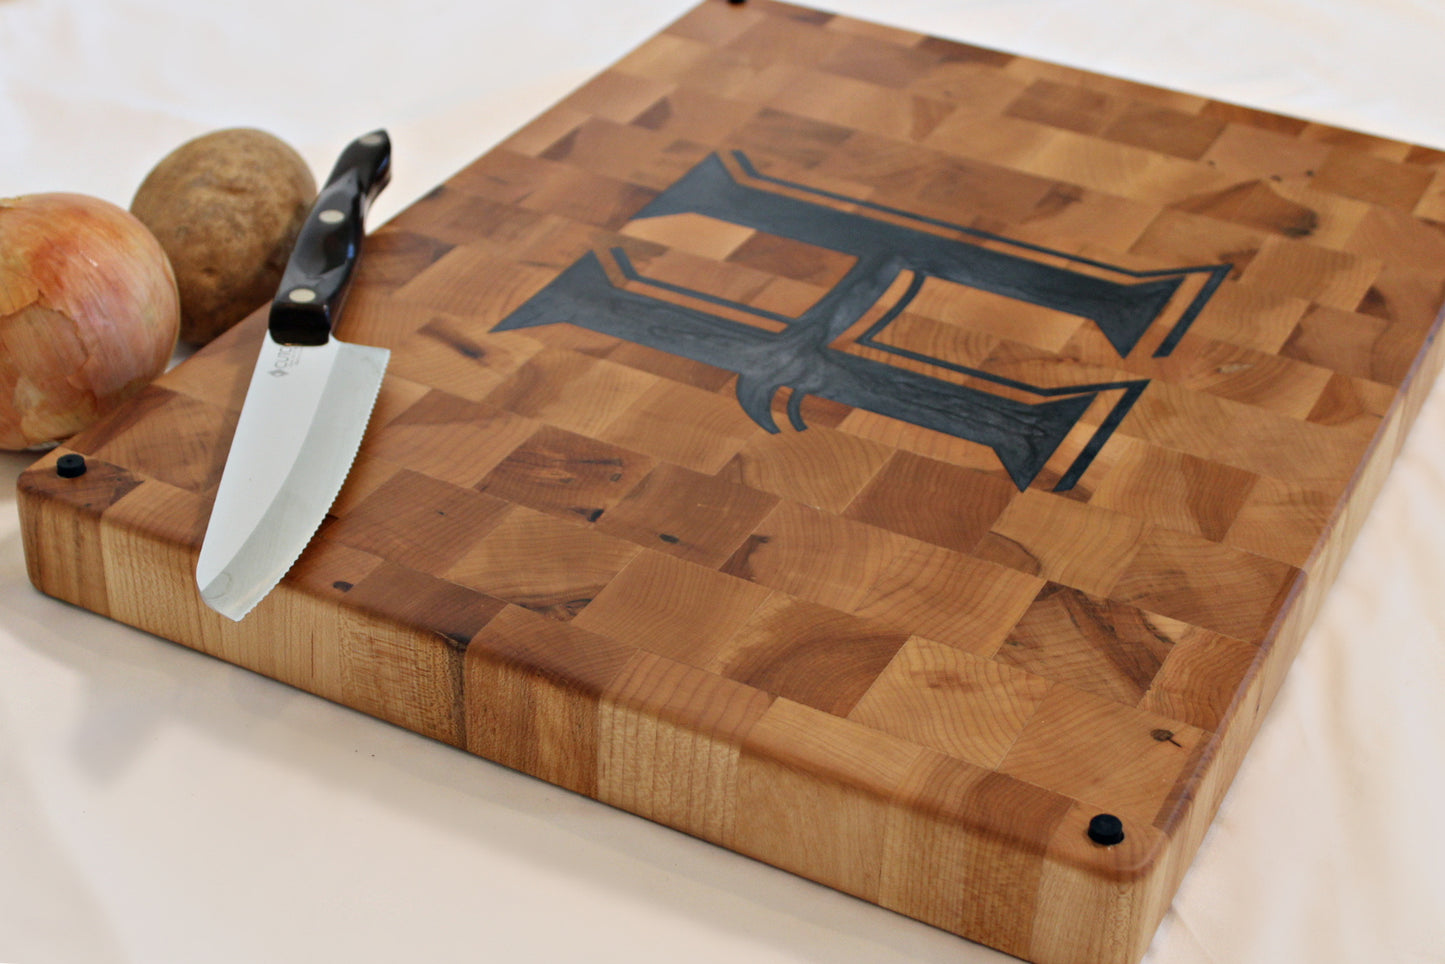 LARGE SIZE "Personalized" End-Grain Cutting Board w/ Your Name, Logo or Initial